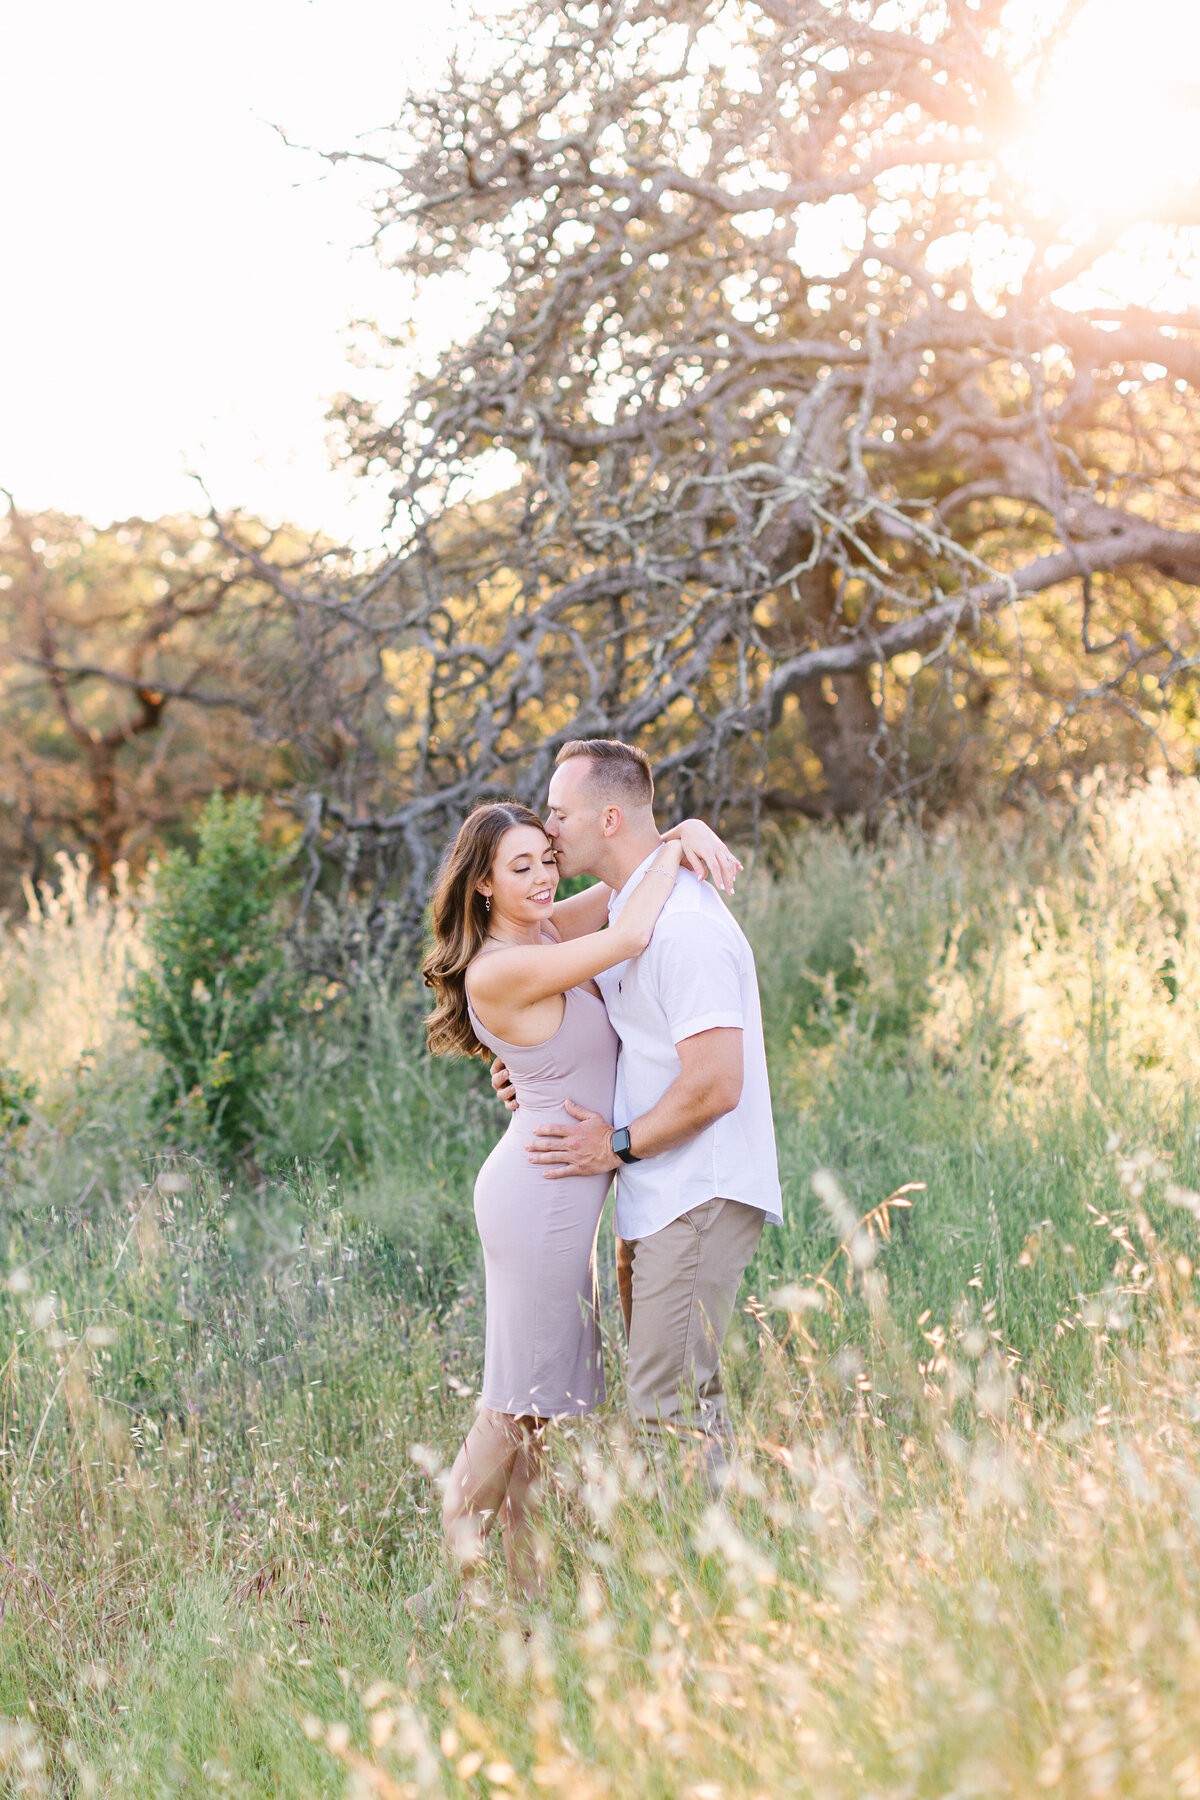 engaged couple hugging in sunny open grass field with trees in background.